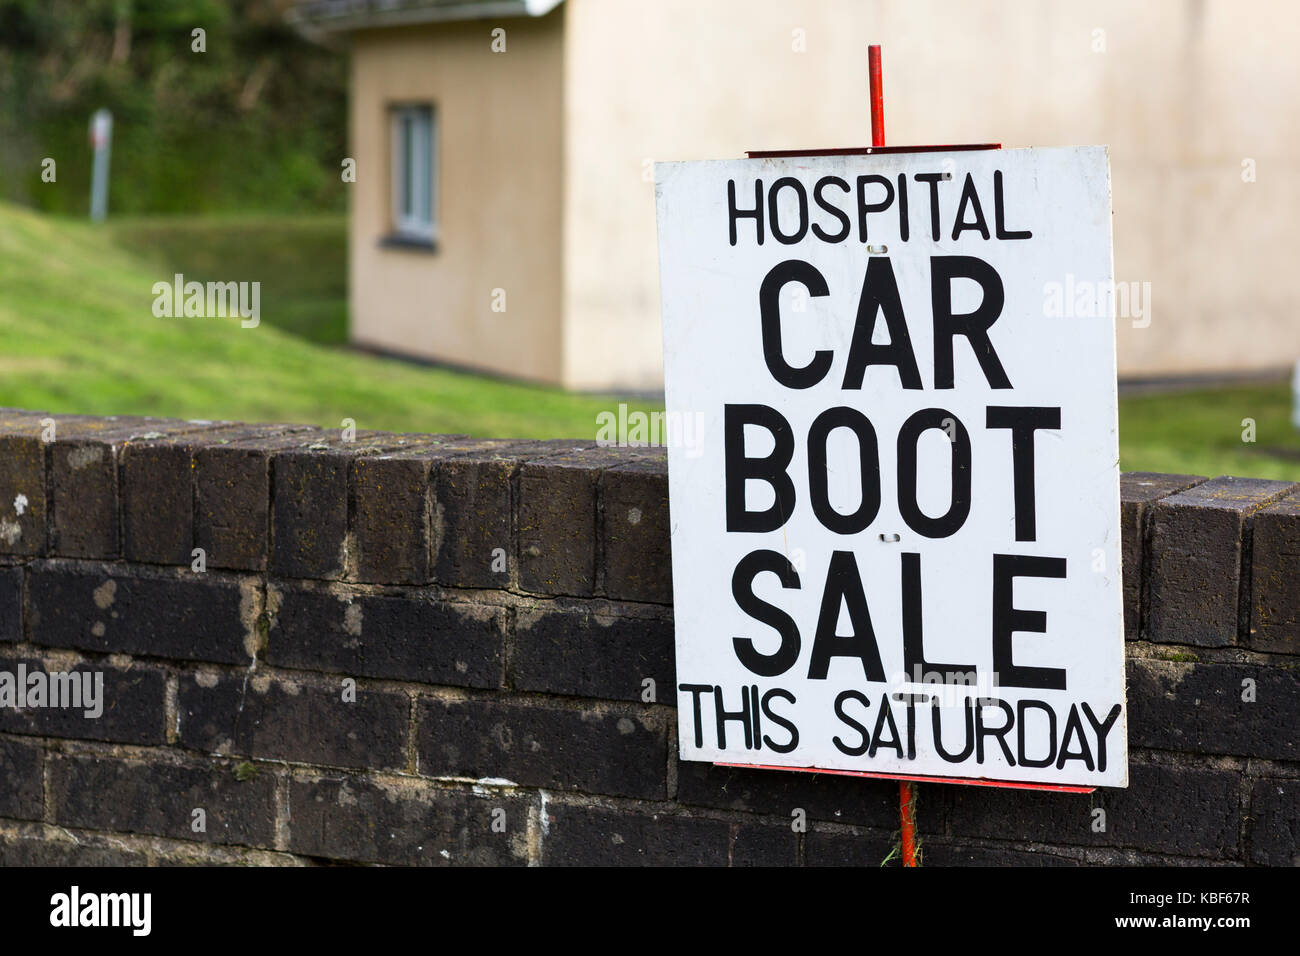 Sign for a car boot sale to raise money for a hospital, illustrating problems such as PFI for hospital finance Stock Photo